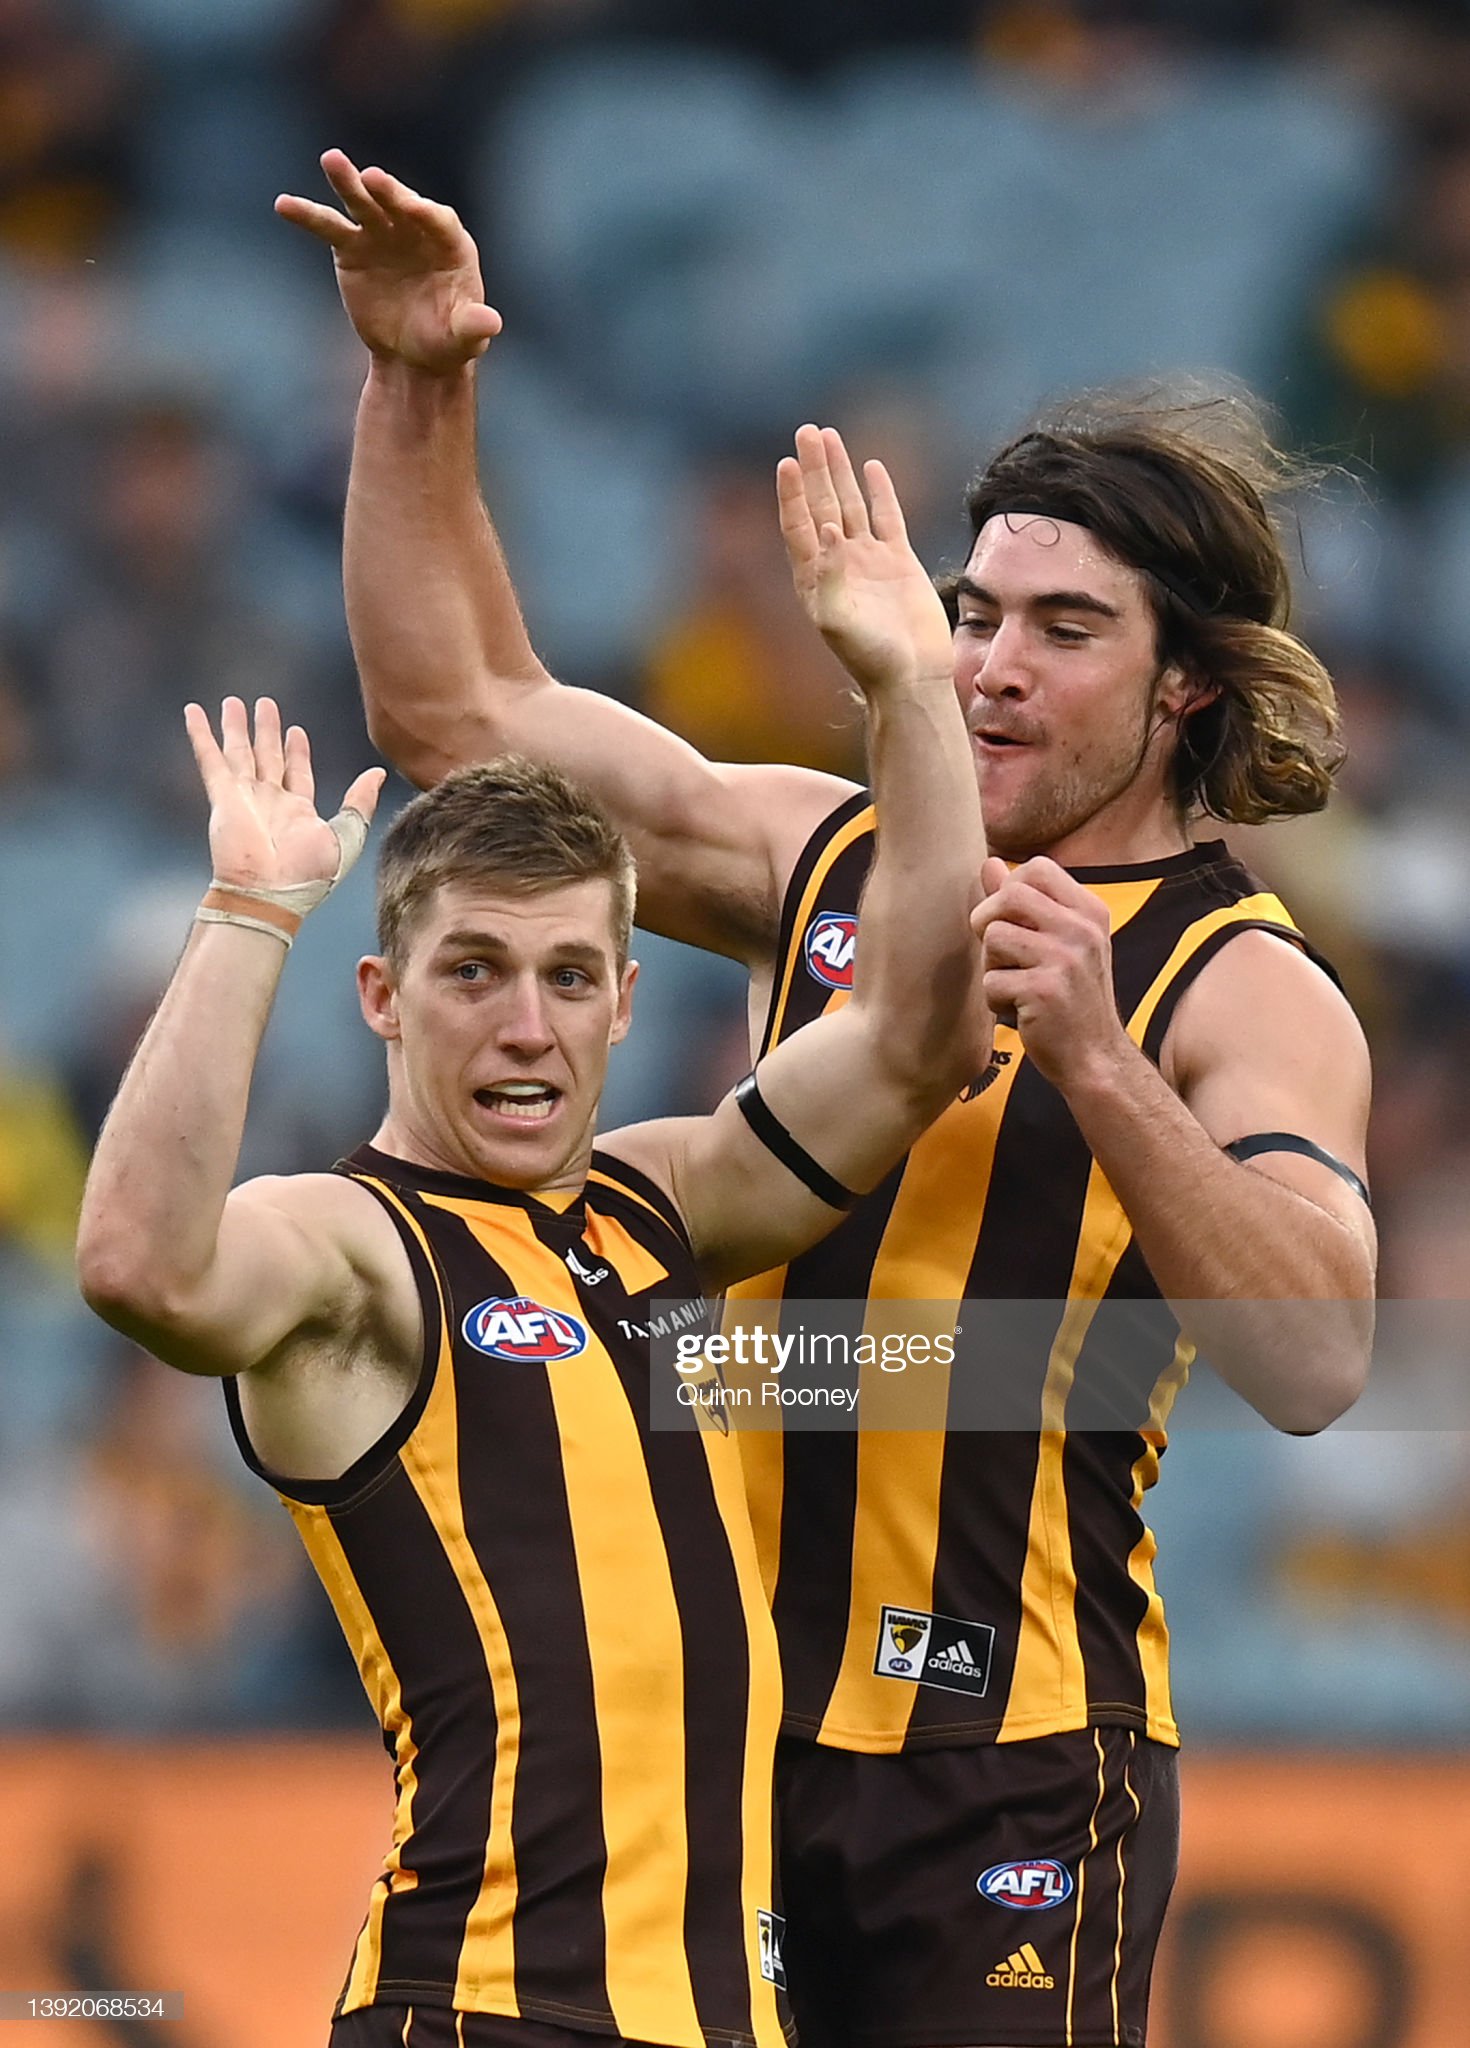 dylan-moore-of-the-hawks-is-congratulated-by-jai-newcombe-after-a-picture-id1392068534